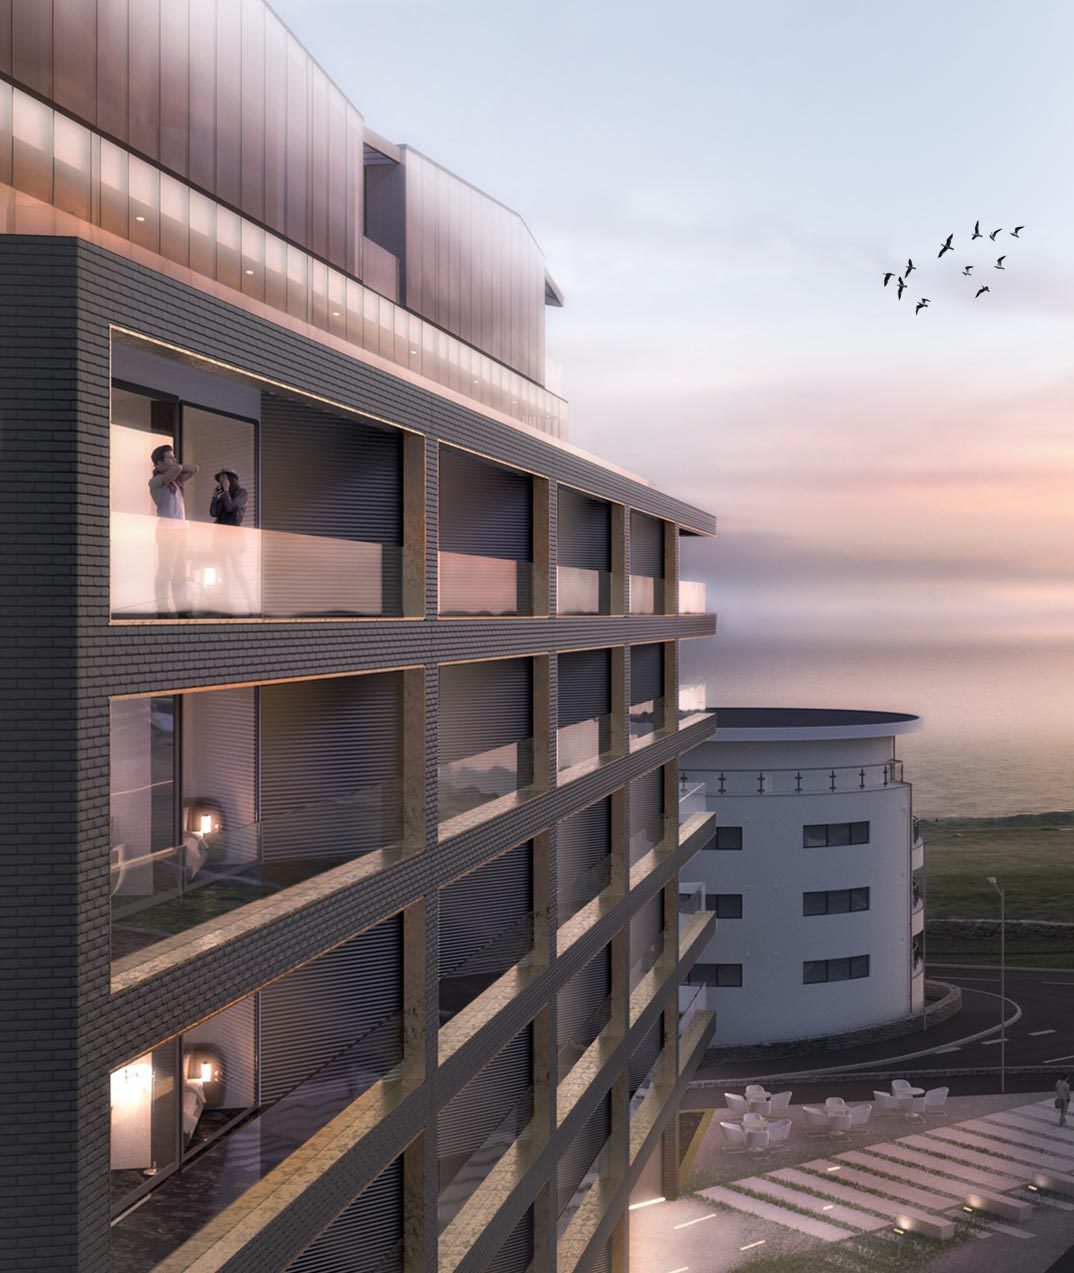 Luxury New build Fistral Bay, located in Newquay. Premium coastline living was a priority for our Newquay based development, Fistral Bay. Featuring circa 80 units which all showcase our Queensbridge Homes Platinum Specification.